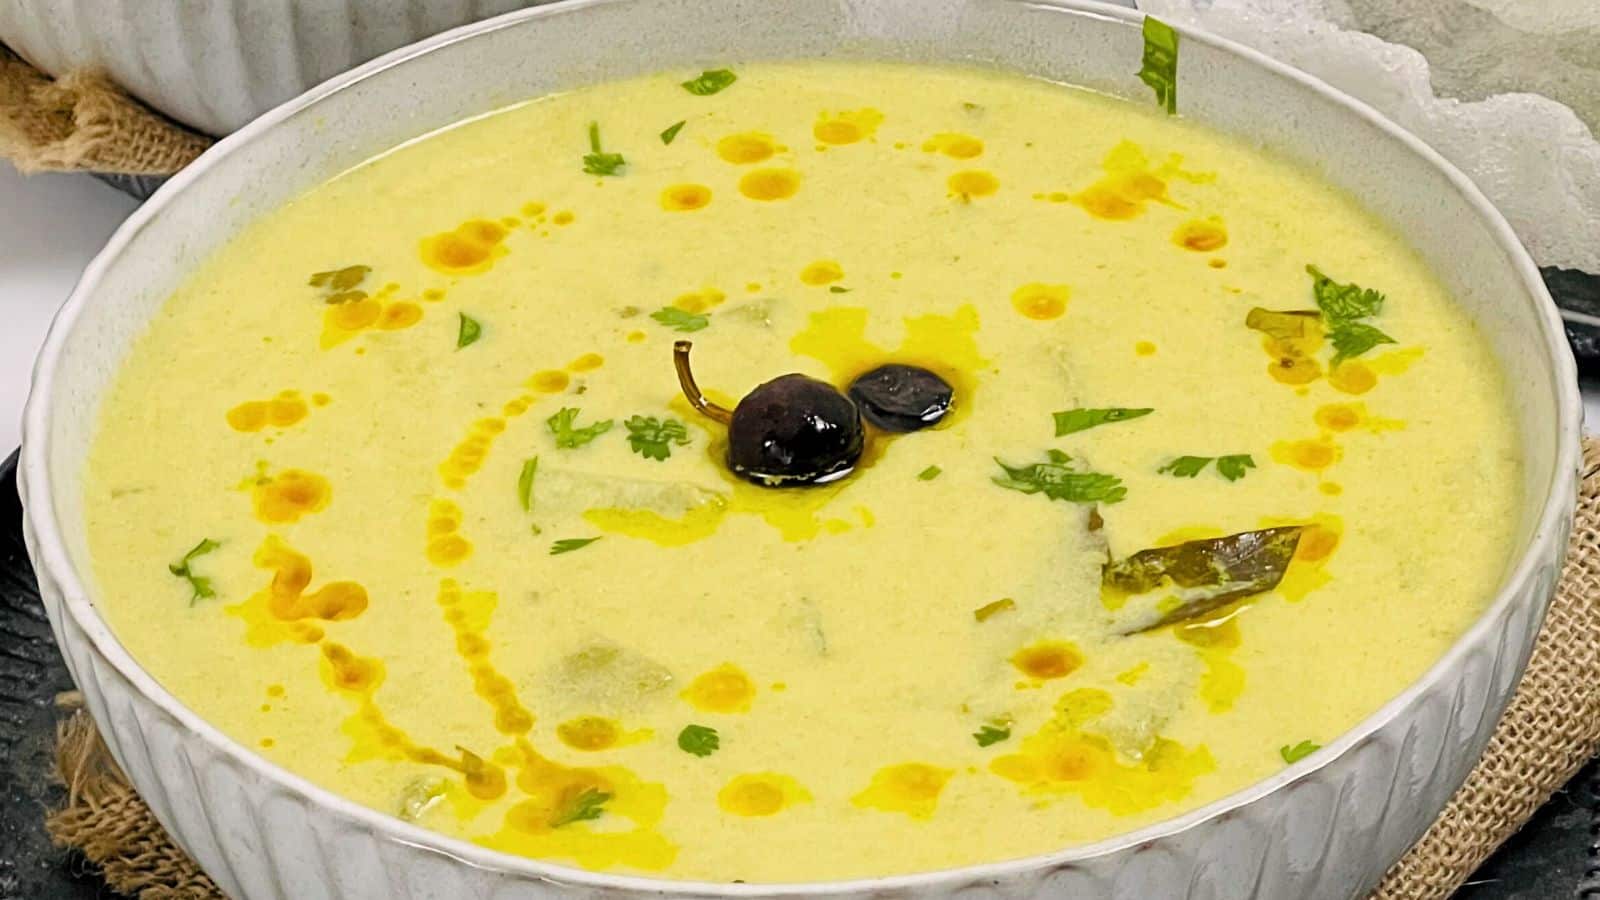 A bowl of creamy yellow soup garnished with herbs and oil on top of a cloth.